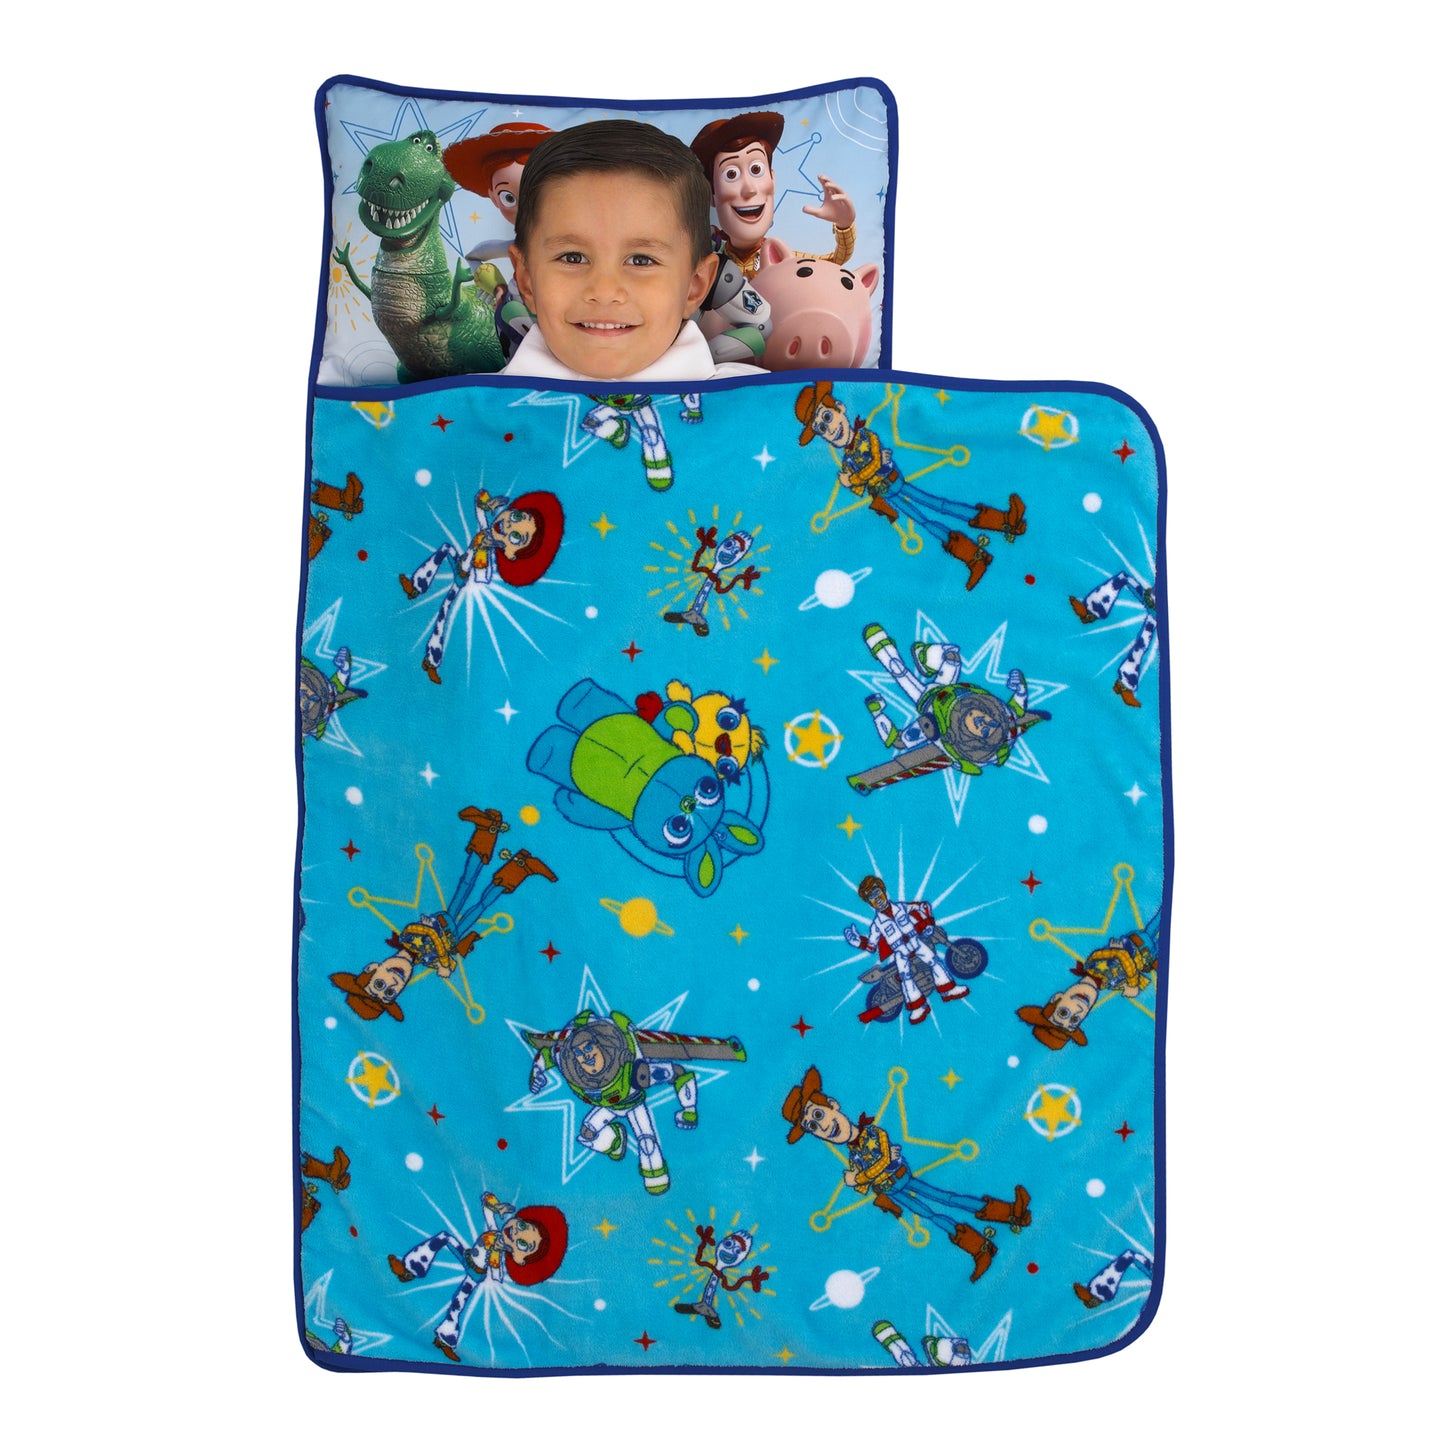 Disney Toy Story It's Play Time Blue, Green, Red and Yellow, Woody, Buzz and The Toys Toddler Nap Mat